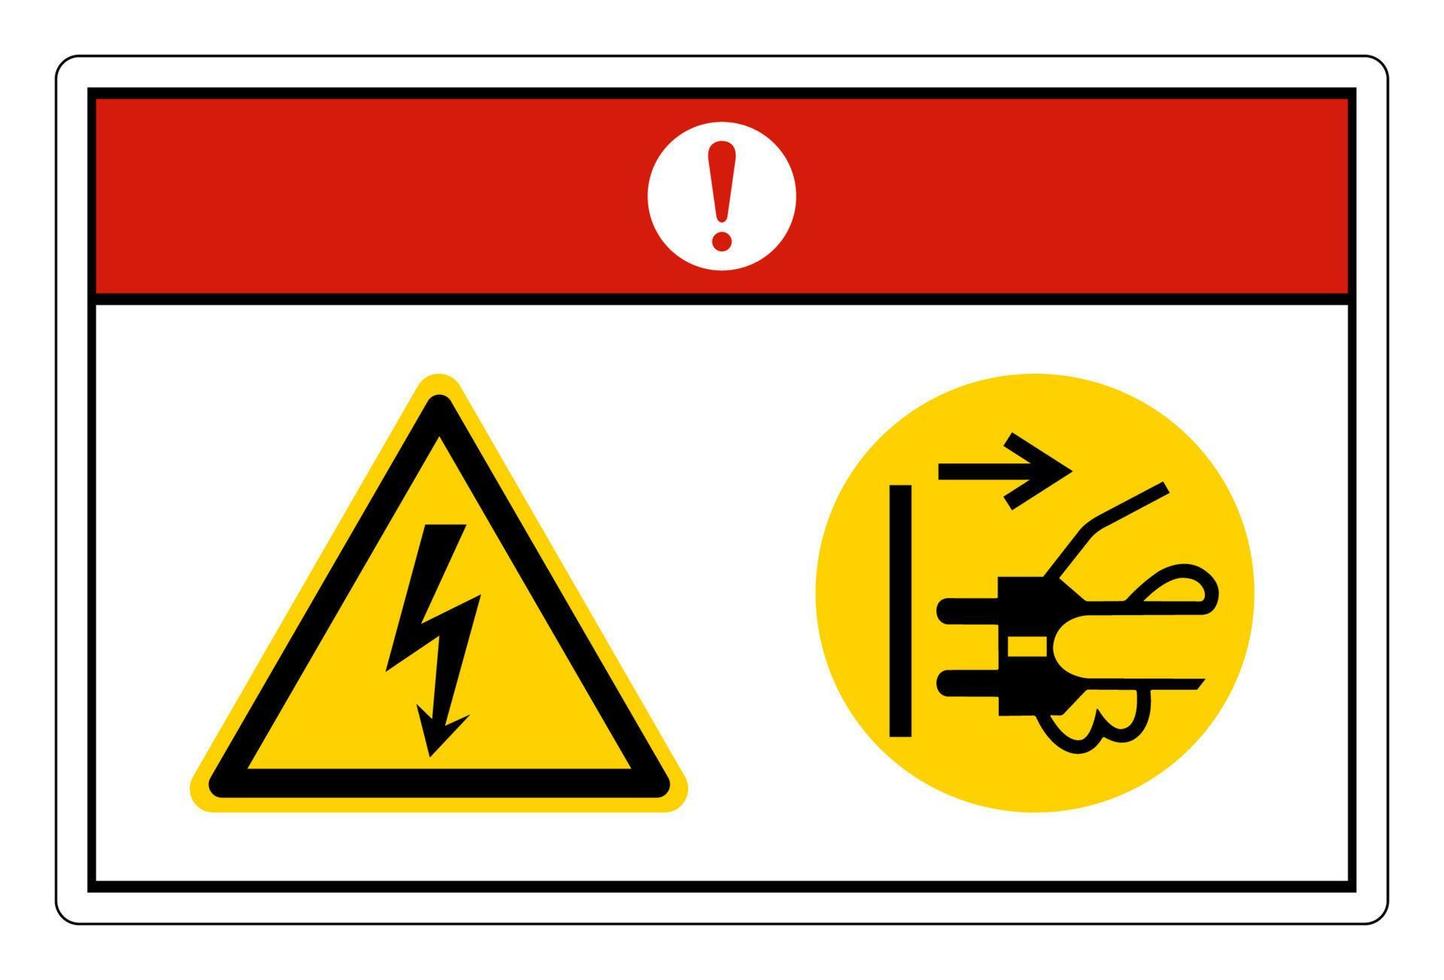 Danger Hazardous Voltage Disconnect Mains Plug From Electrical Outlet Symbol Sign On White Background vector